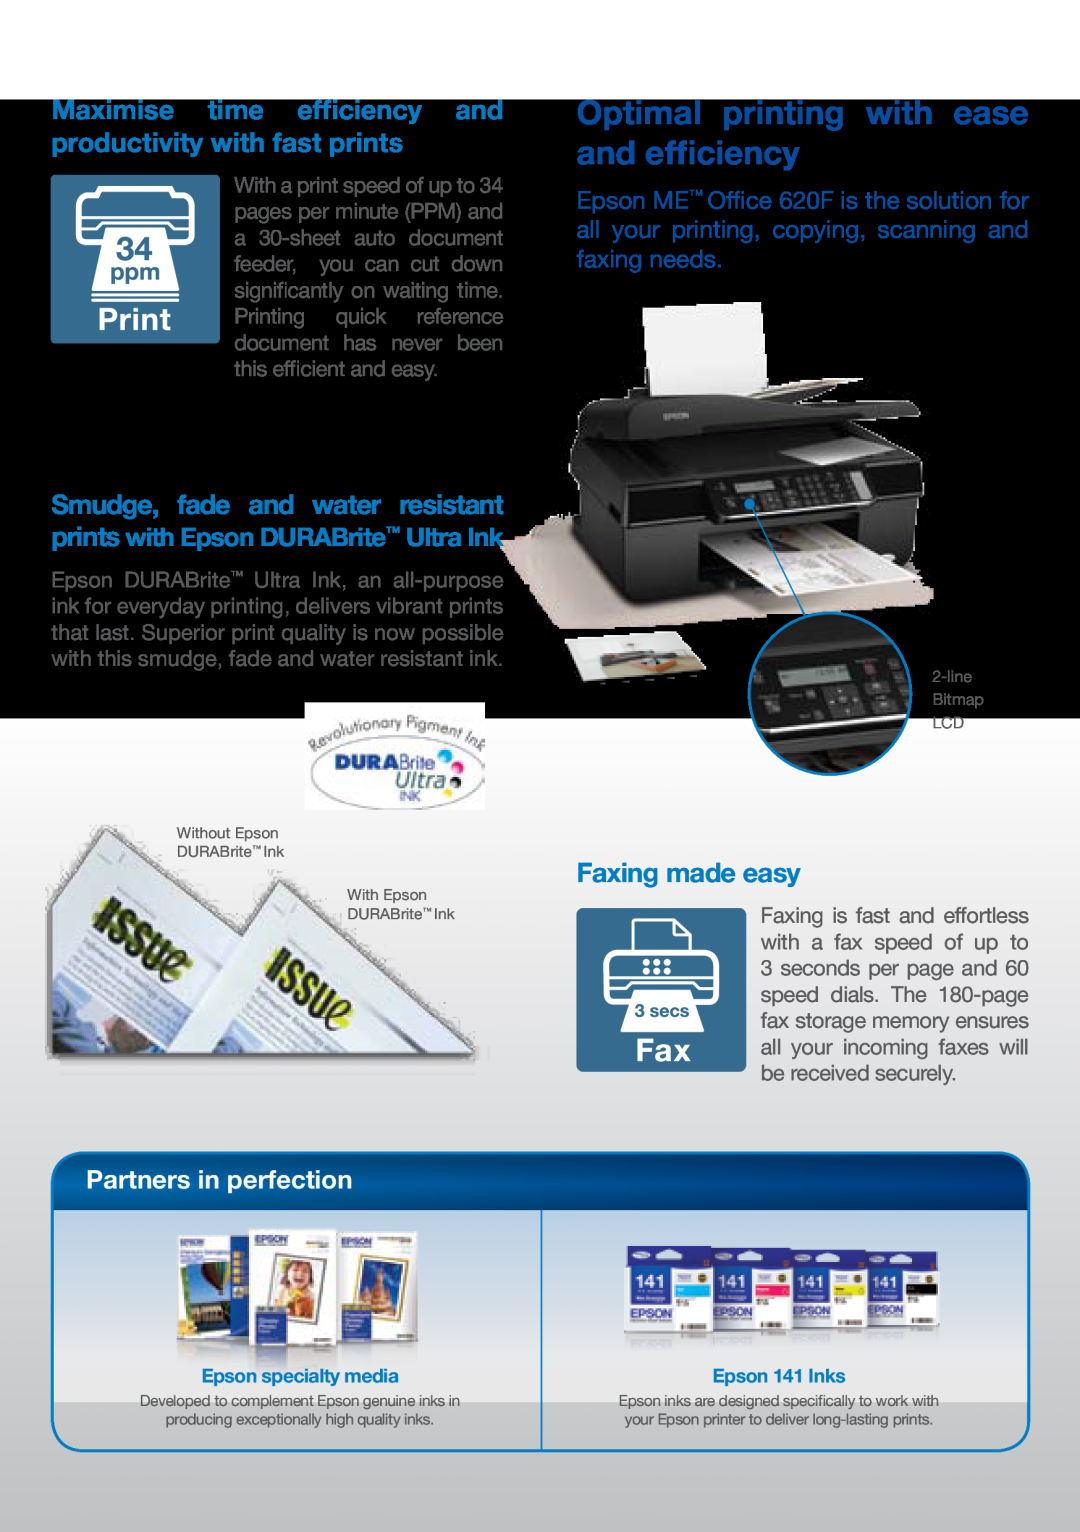 Epson 620F manual Maximise time efficiency and productivity with fast prints, Faxing made easy, Partners in perfection 